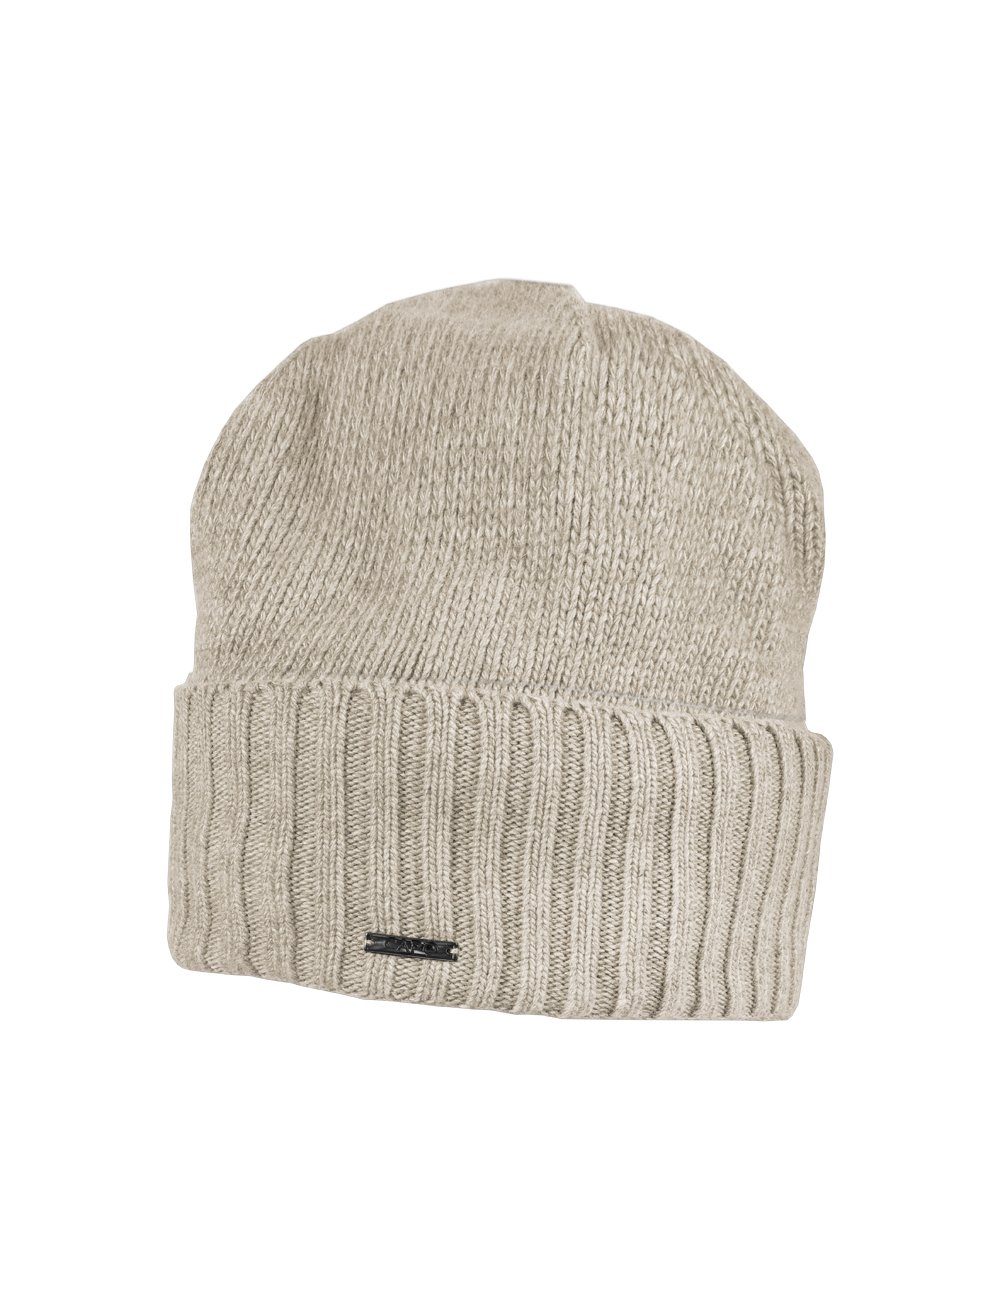 CAPO Strickmütze CAPO-HEAVEN CAP plain beige up cap, in knitted ribbed Europe Made turn